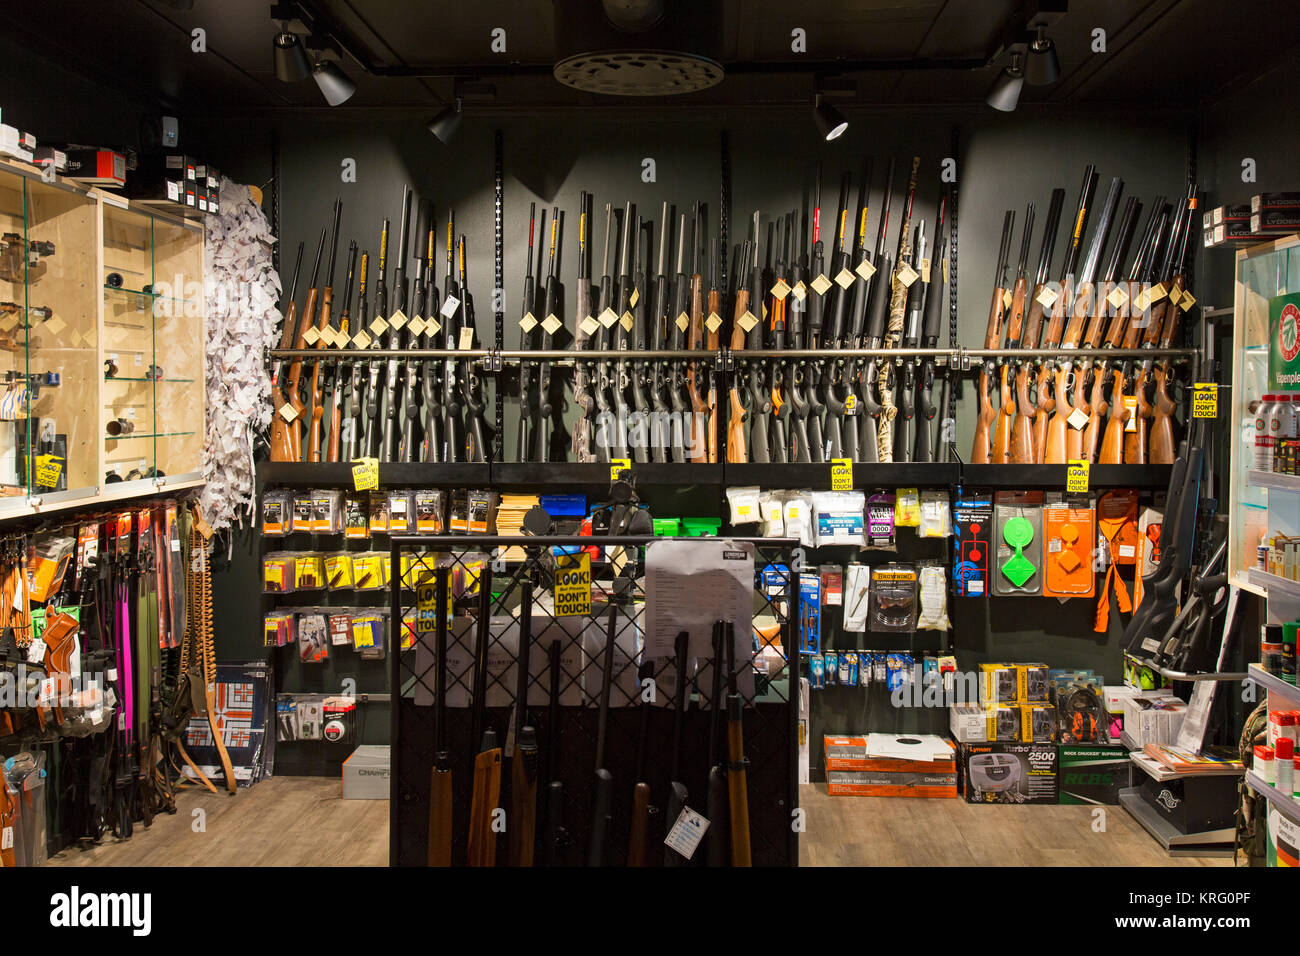 Interior of gunstore selling rifles, handguns and other firearms at Longyearbyen, Svalbard / Spitsbergen, Norway Stock Photo